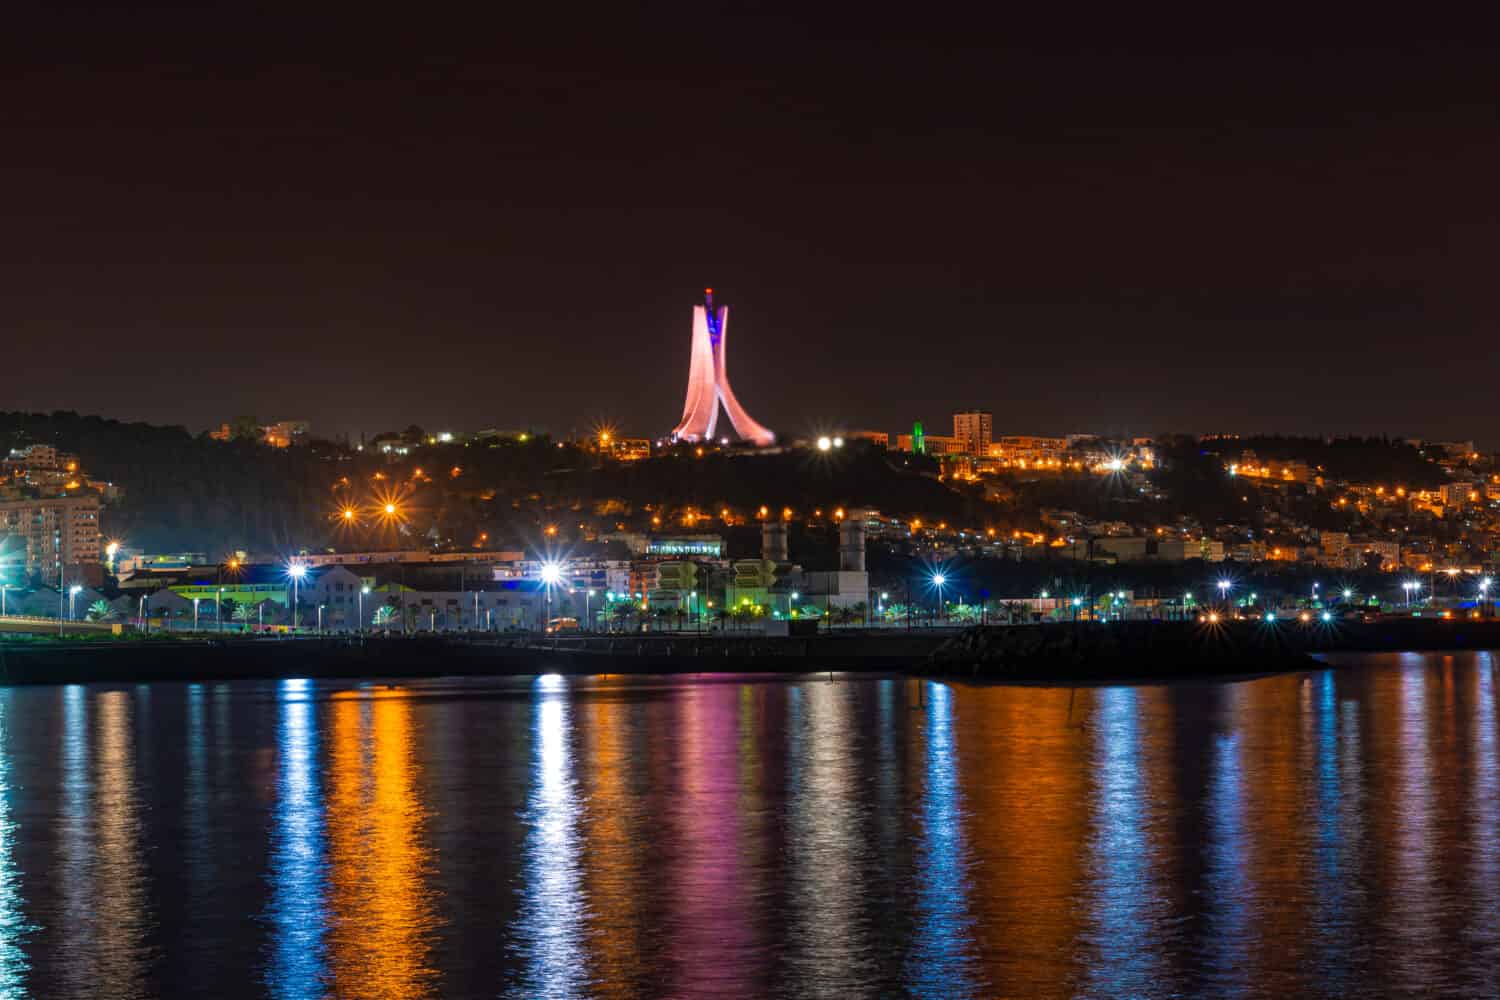 View of Algiers at night from Sablette park